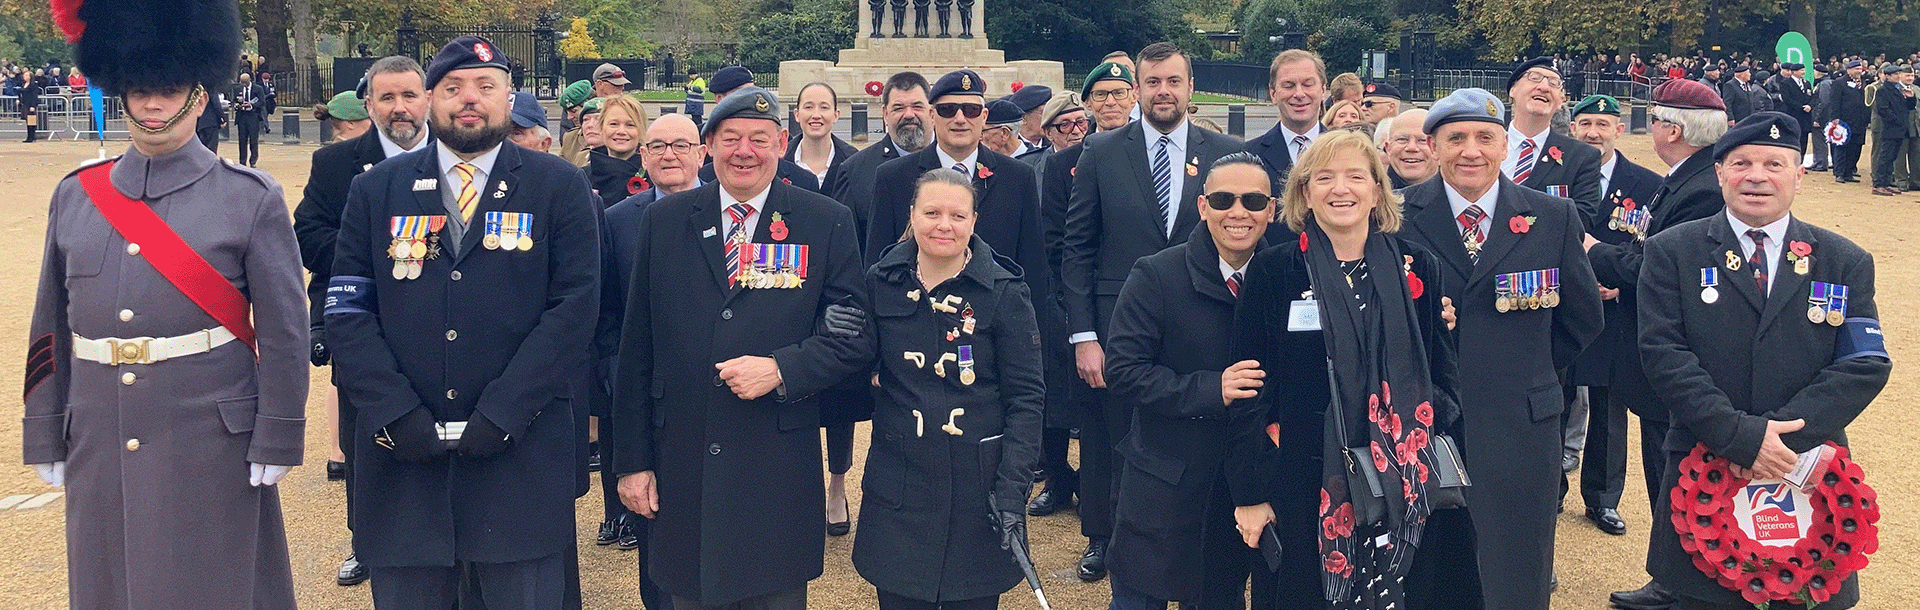 A group photo of Blind Veterans UK at London Remembrance 2021